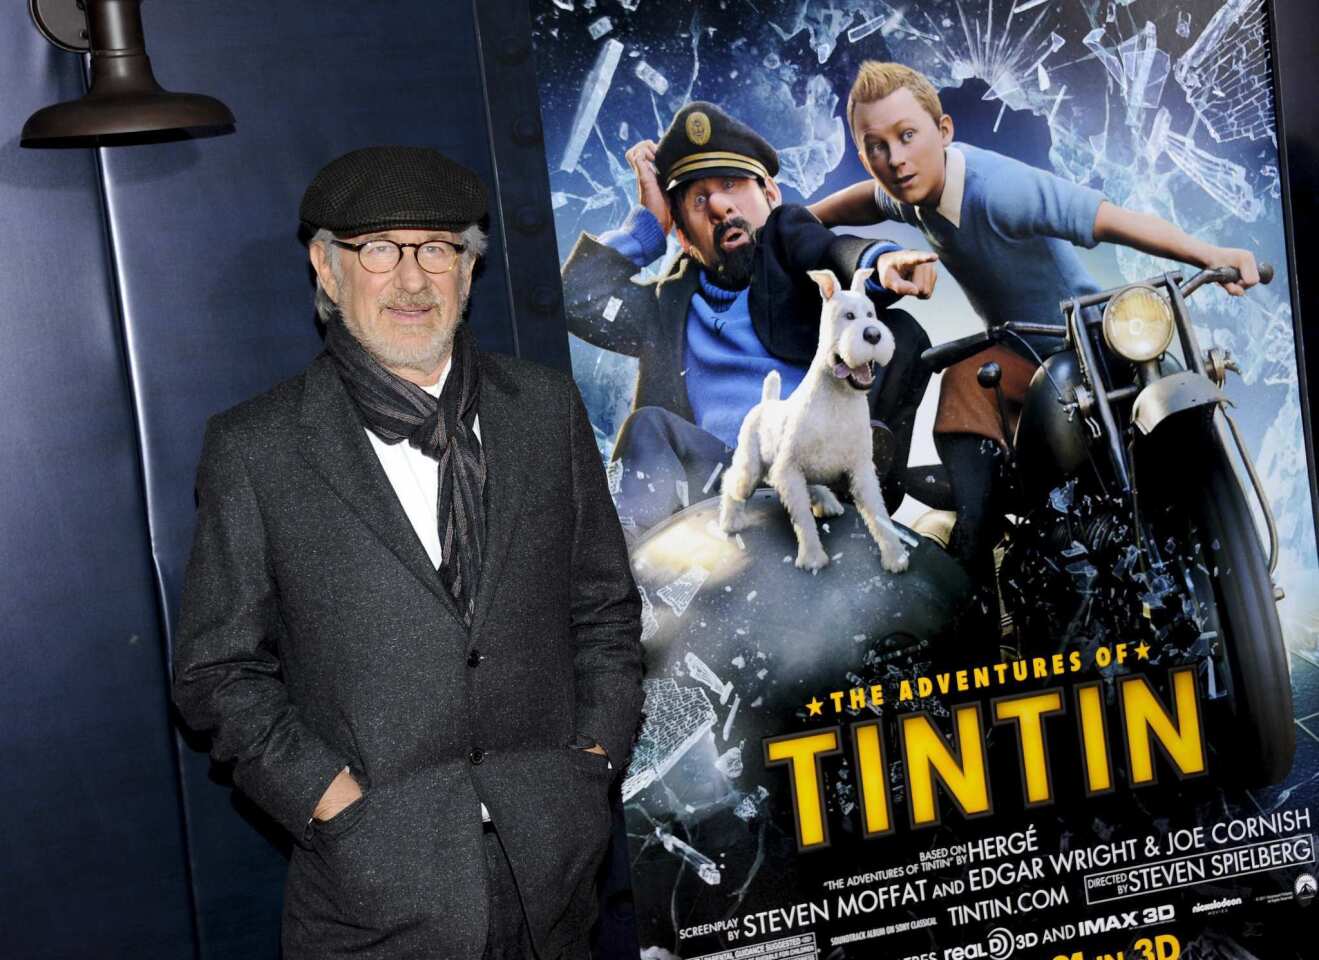 Steven Spielberg directs the film that follows comic book hero Tintin as he searches for lost treasure.